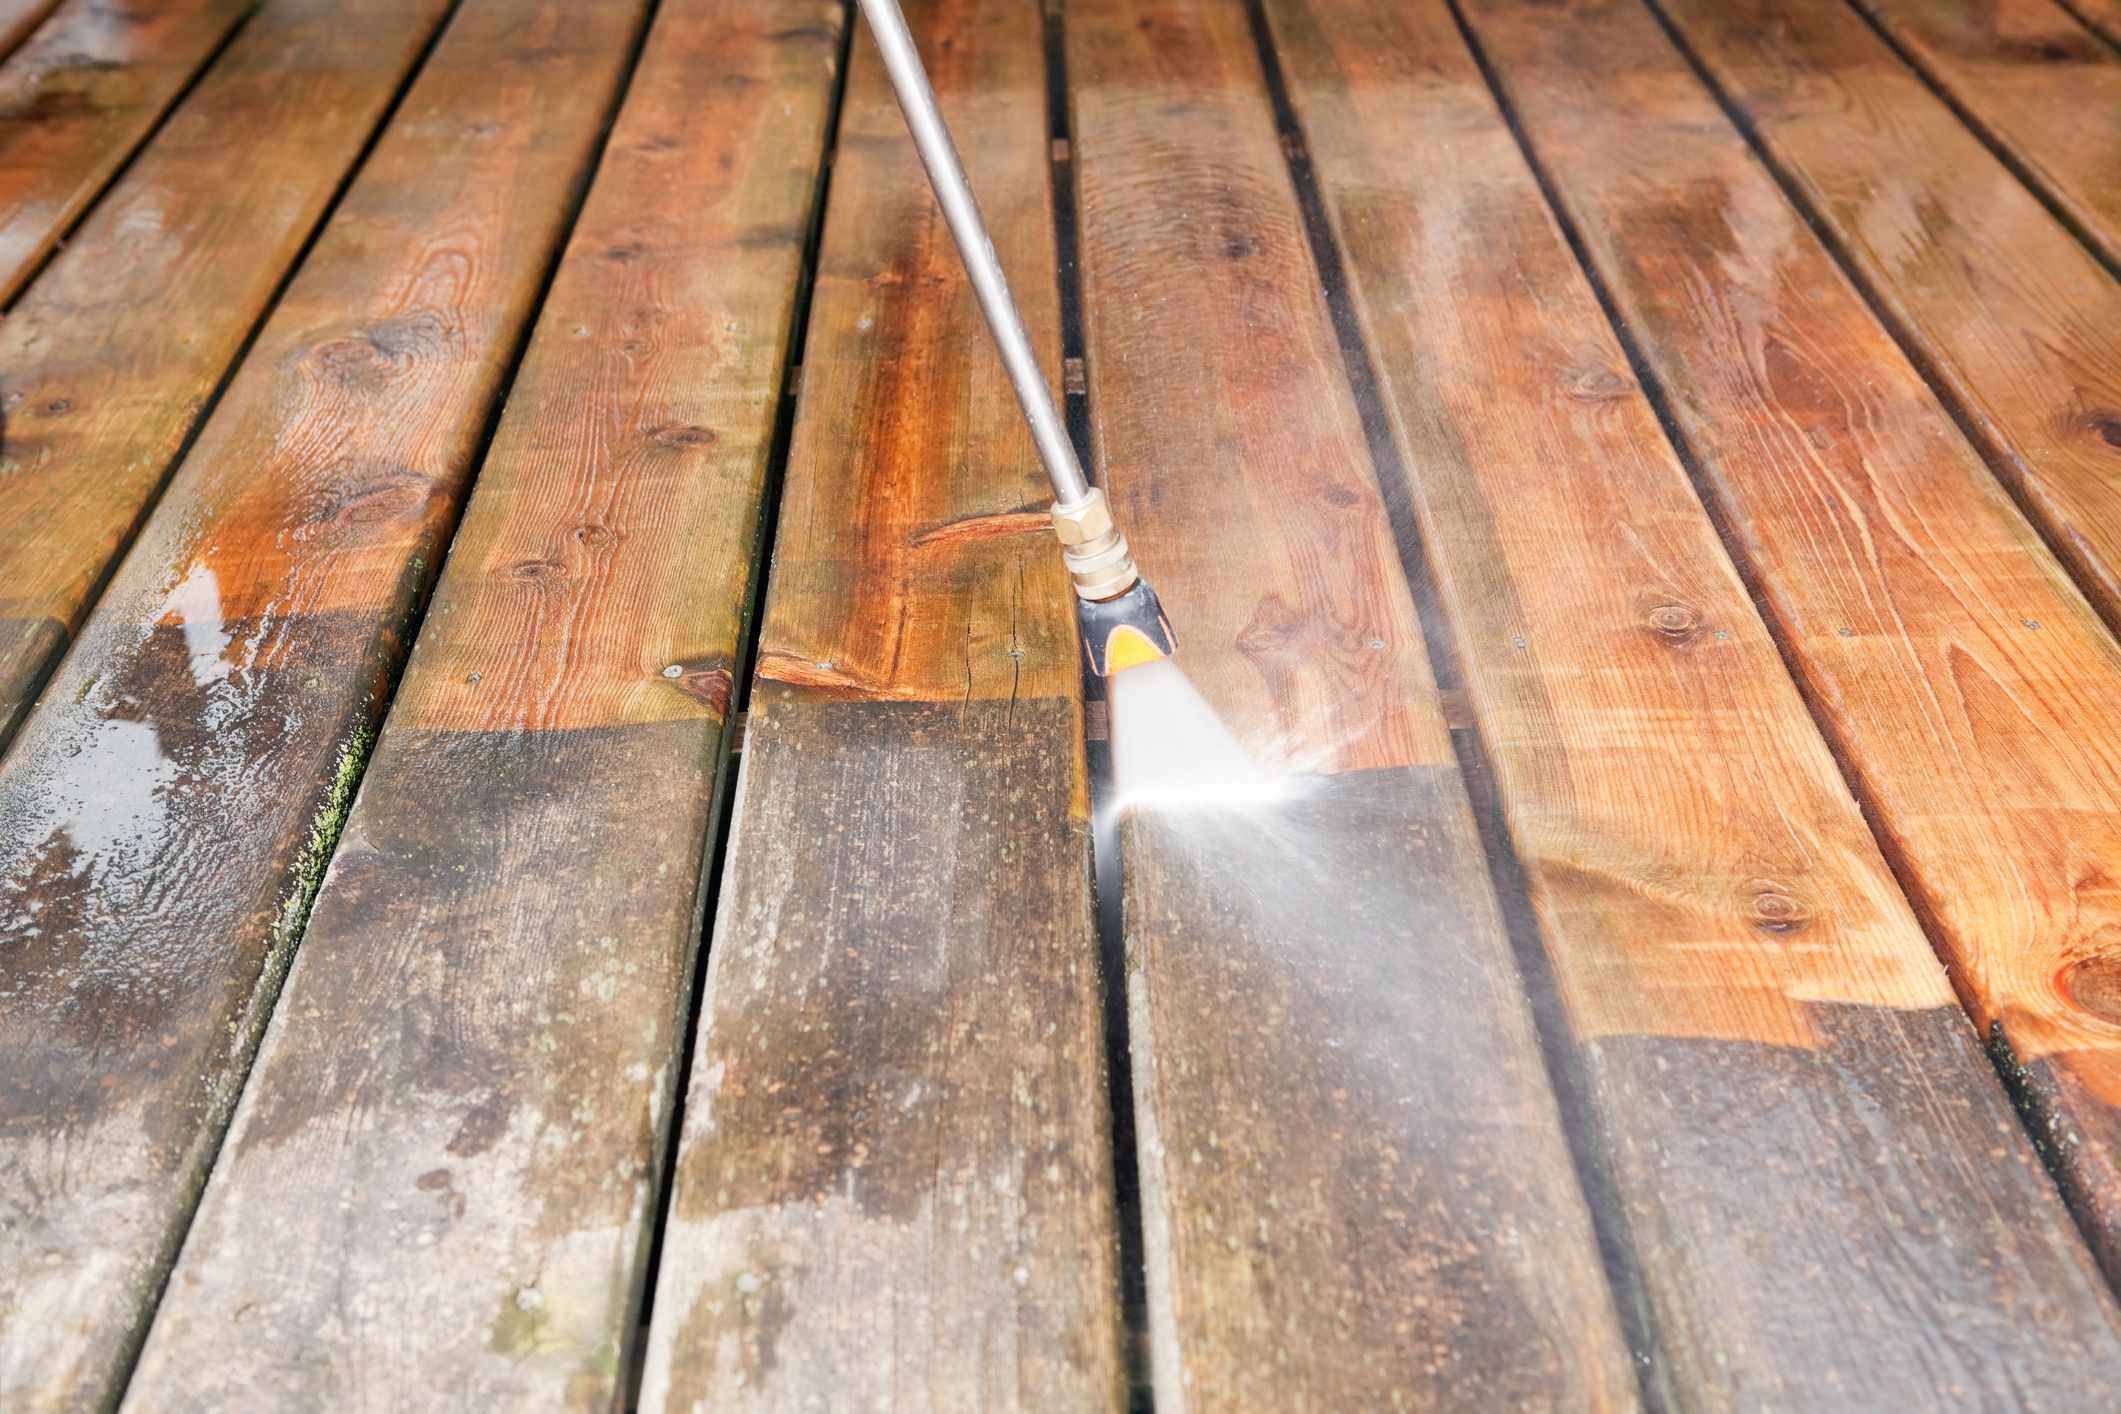 FCO Pressure Washing Services